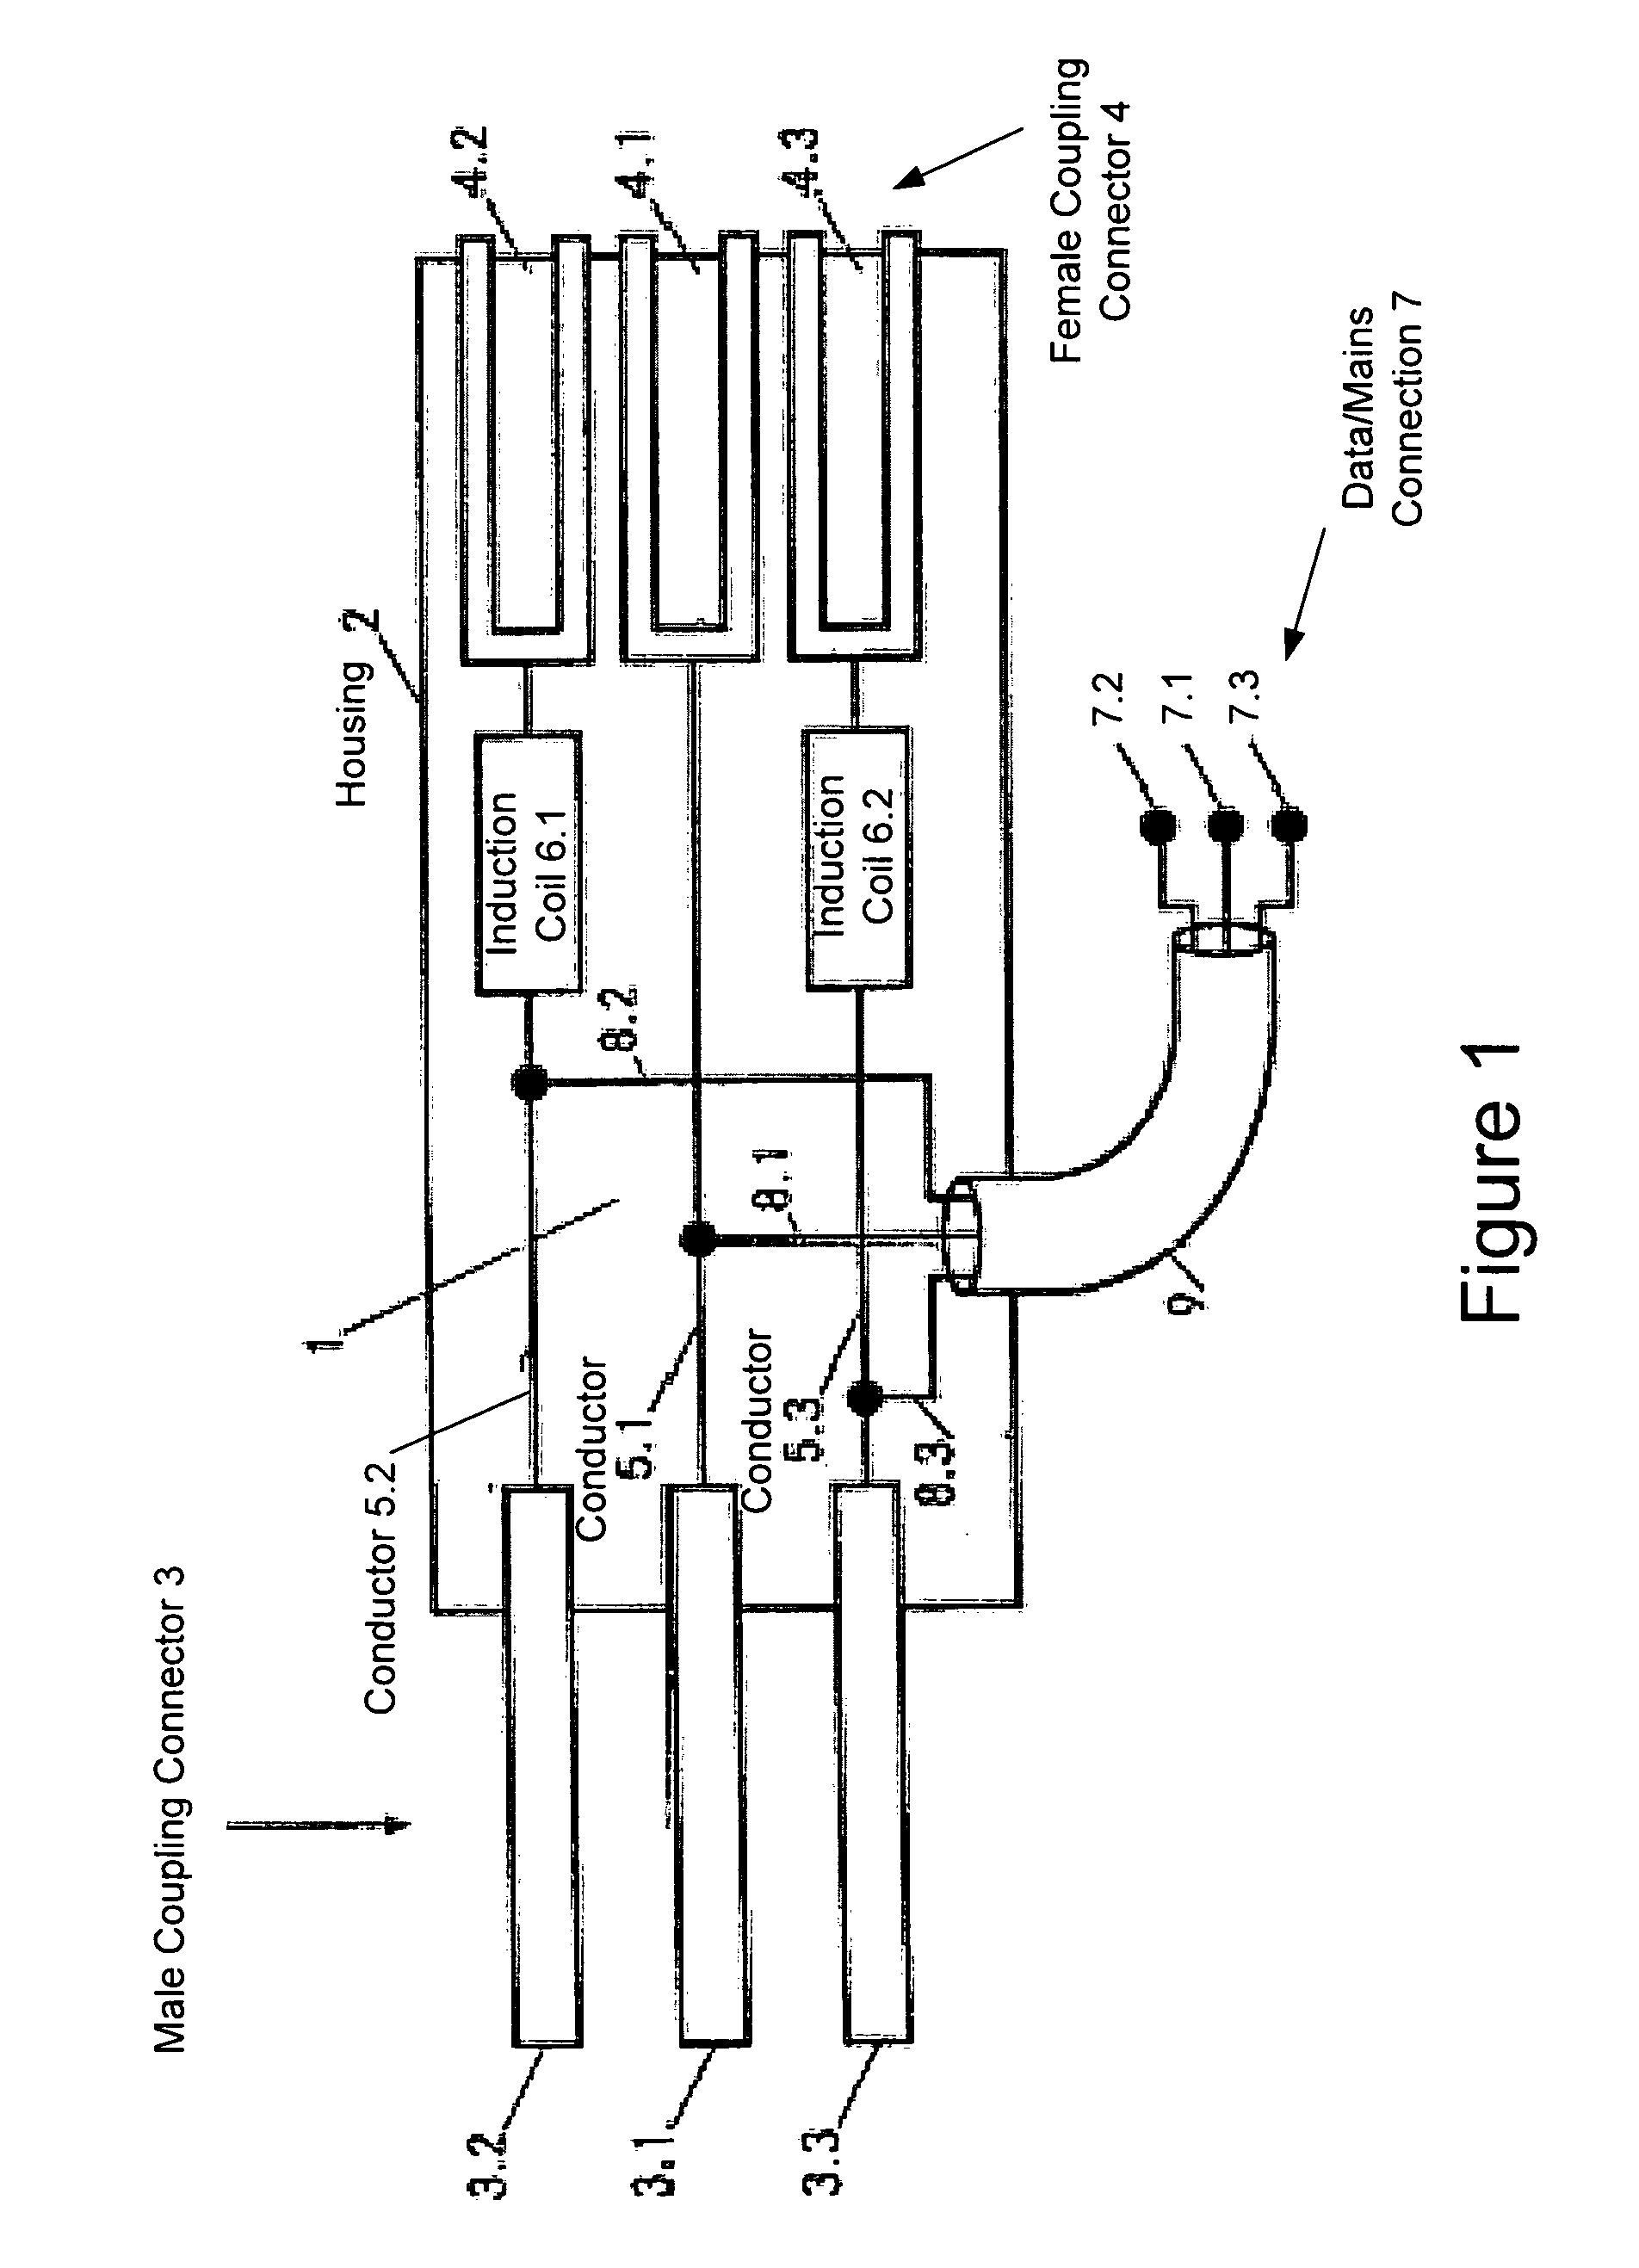 Assembly for transmitting information via a low-voltage power supply network